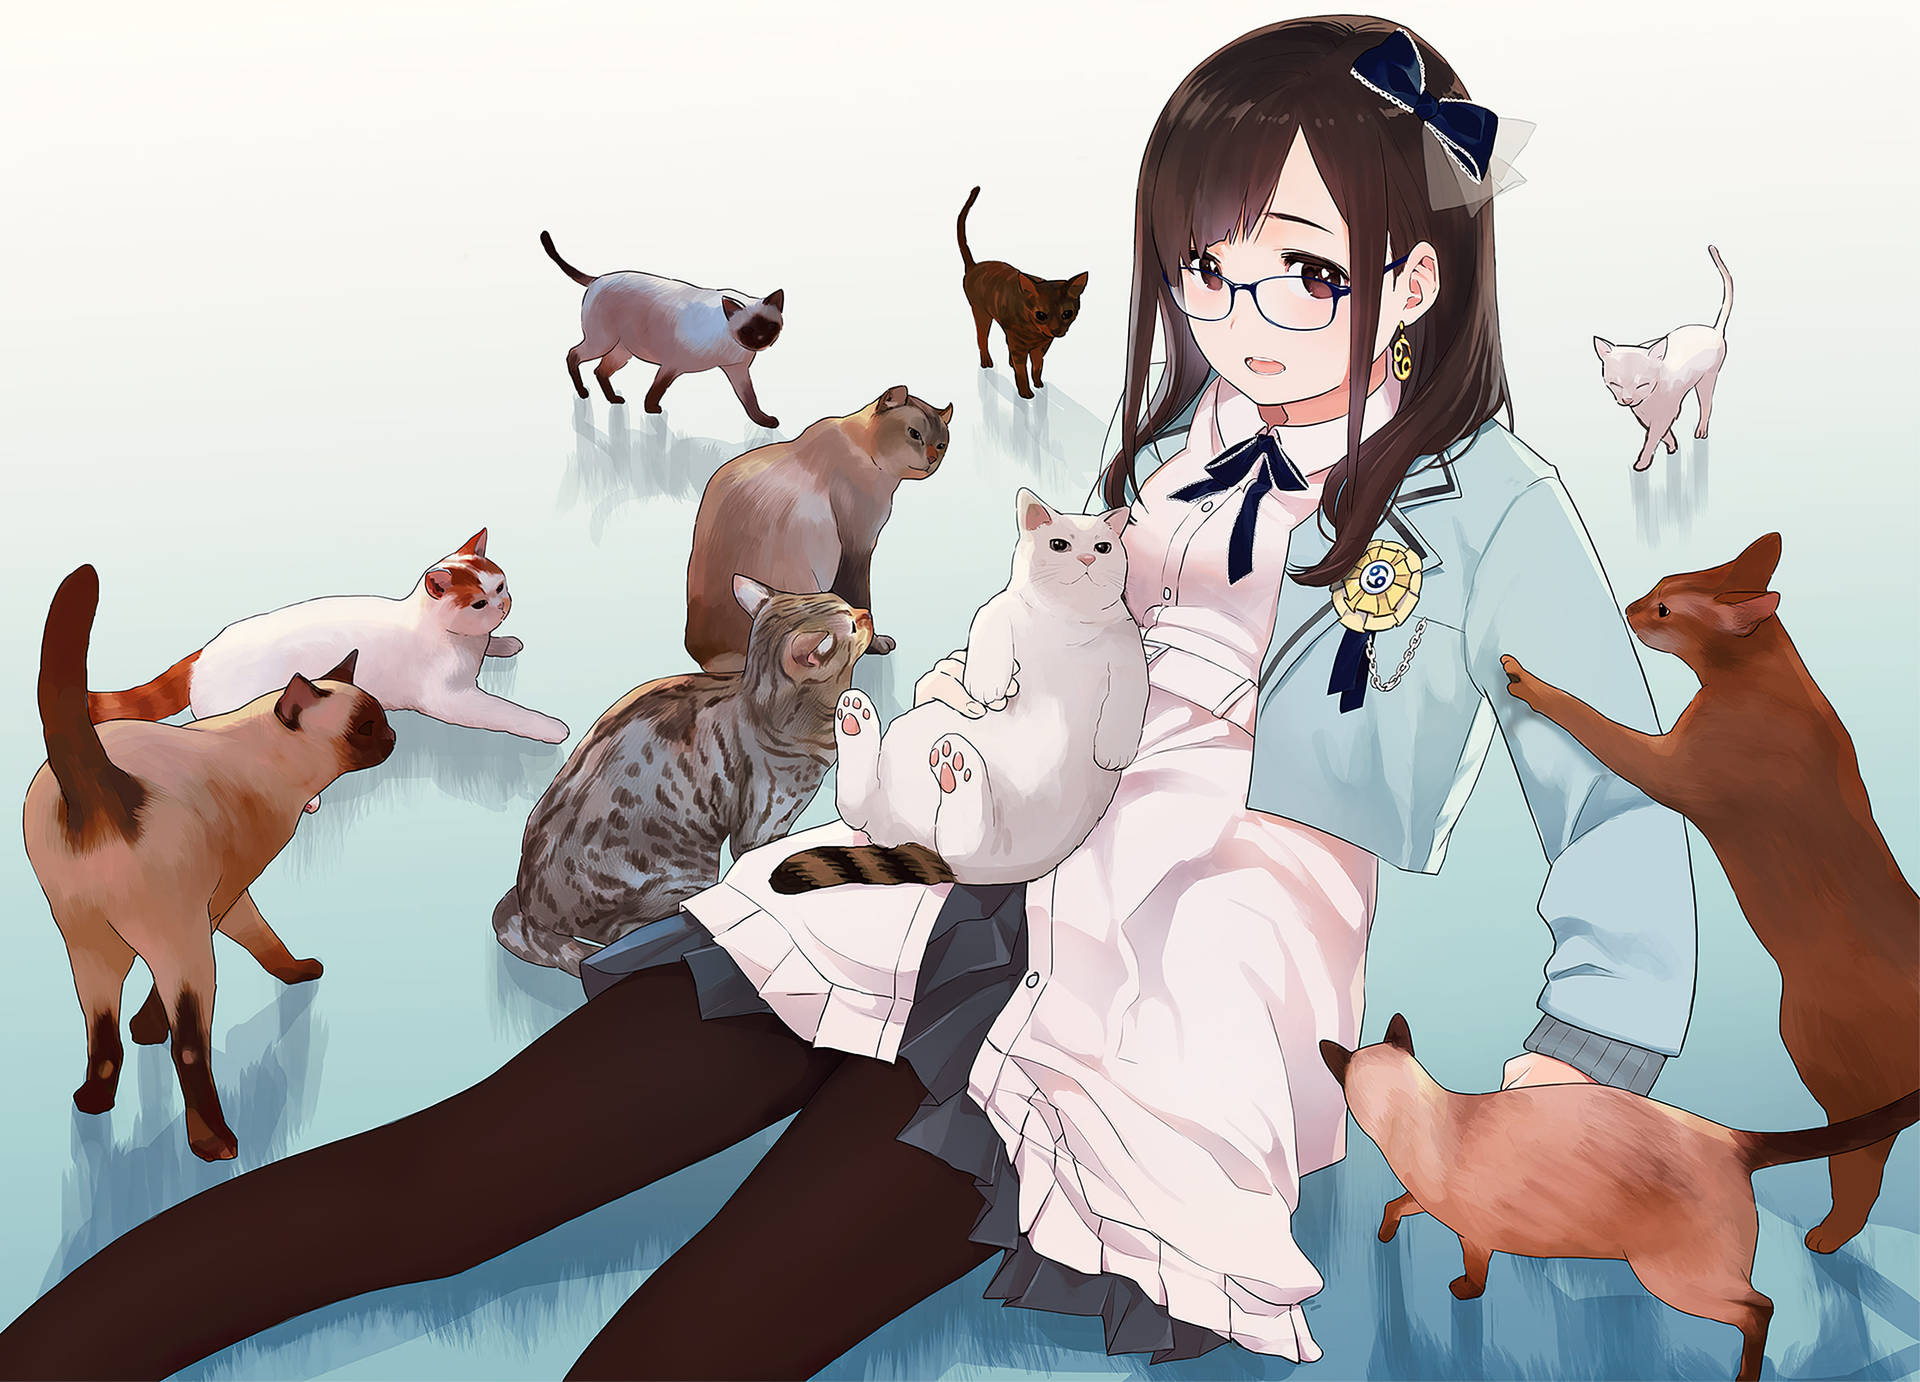 Anime - Cat girl with blue eyes and sky background 4K wallpaper download